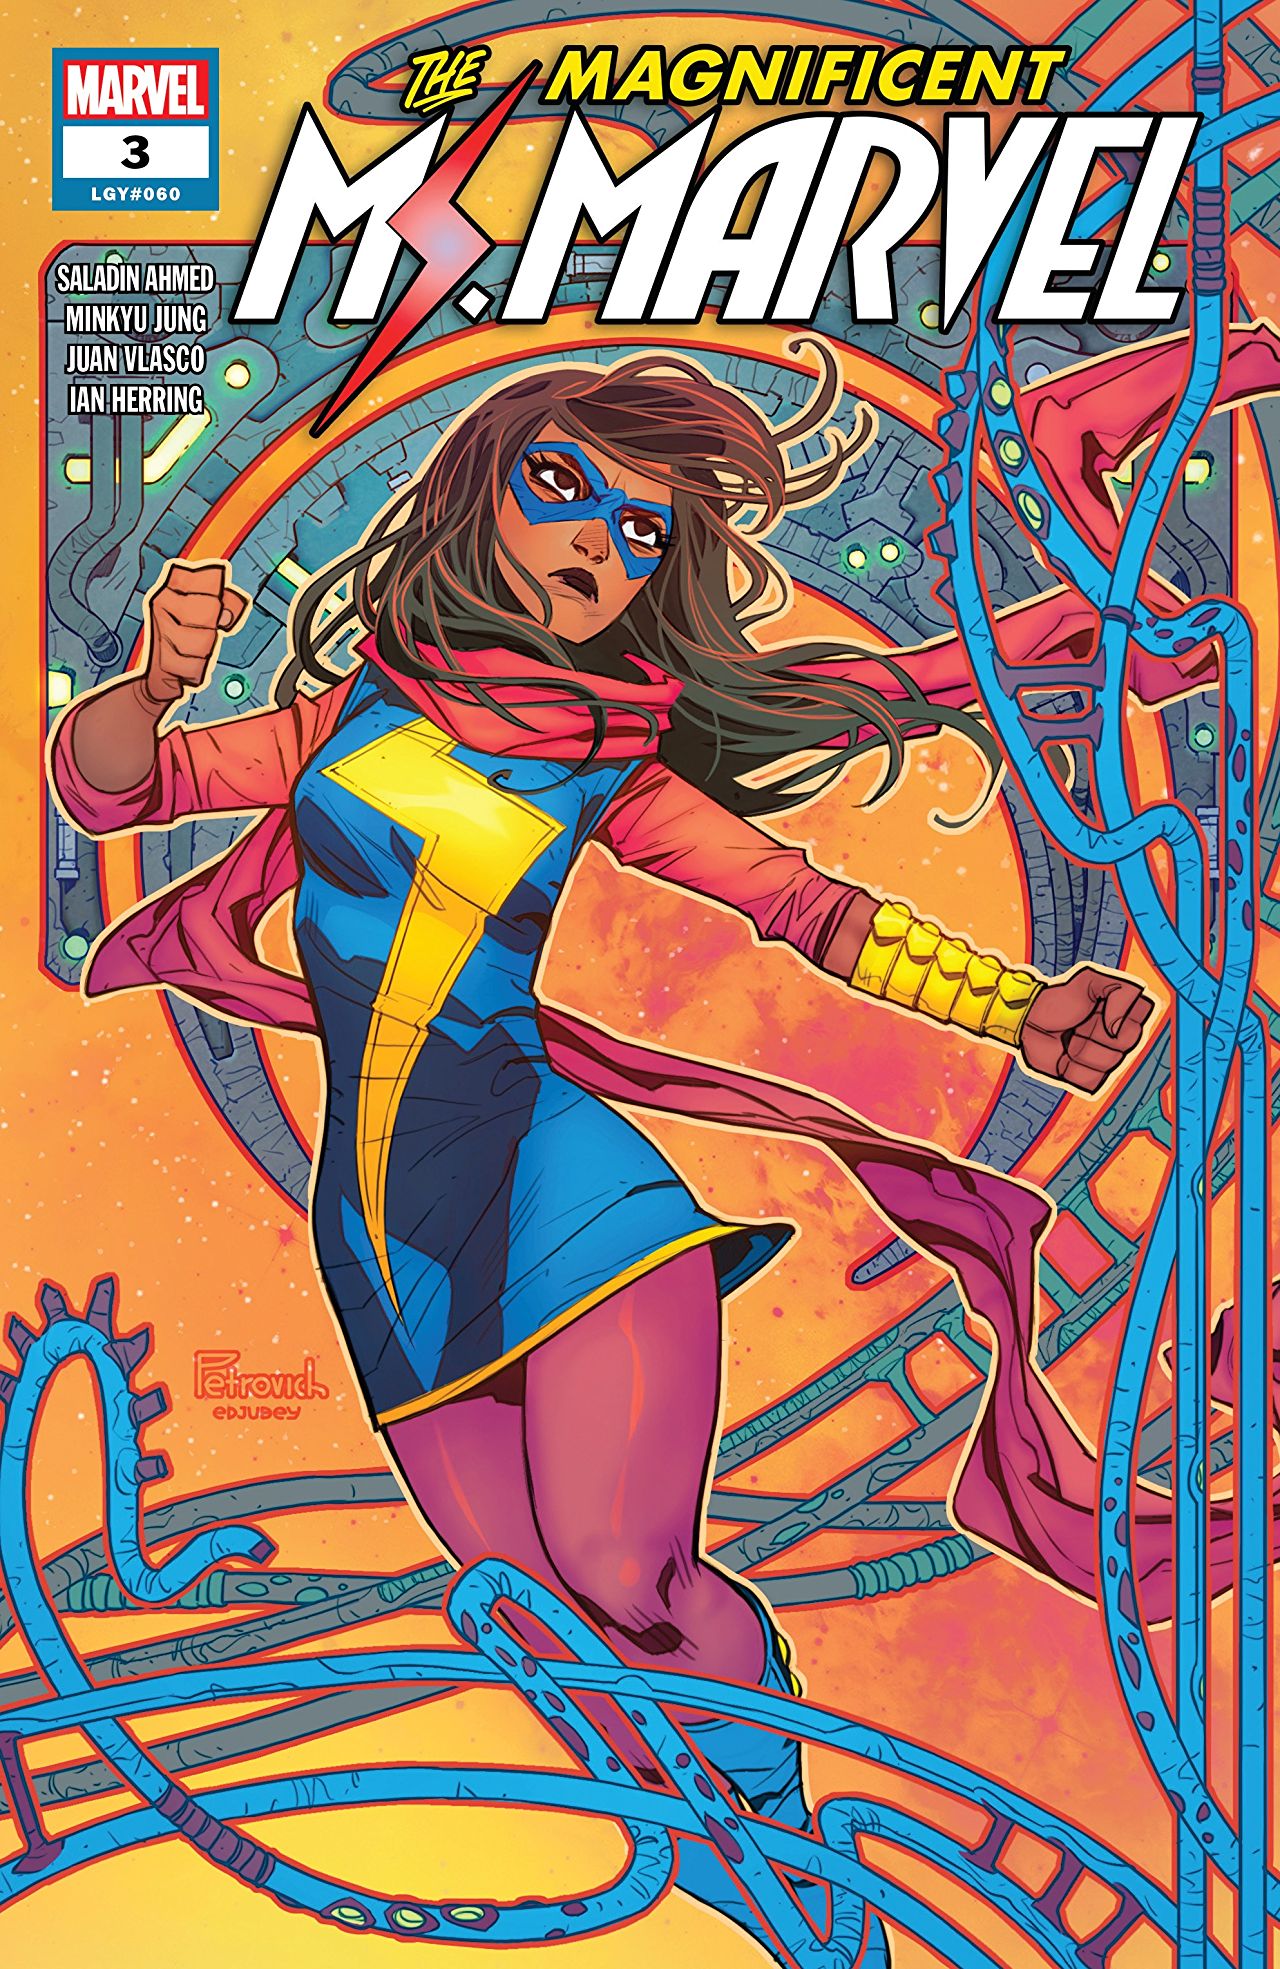 Marvel Preview: The Magnificent Ms. Marvel #3